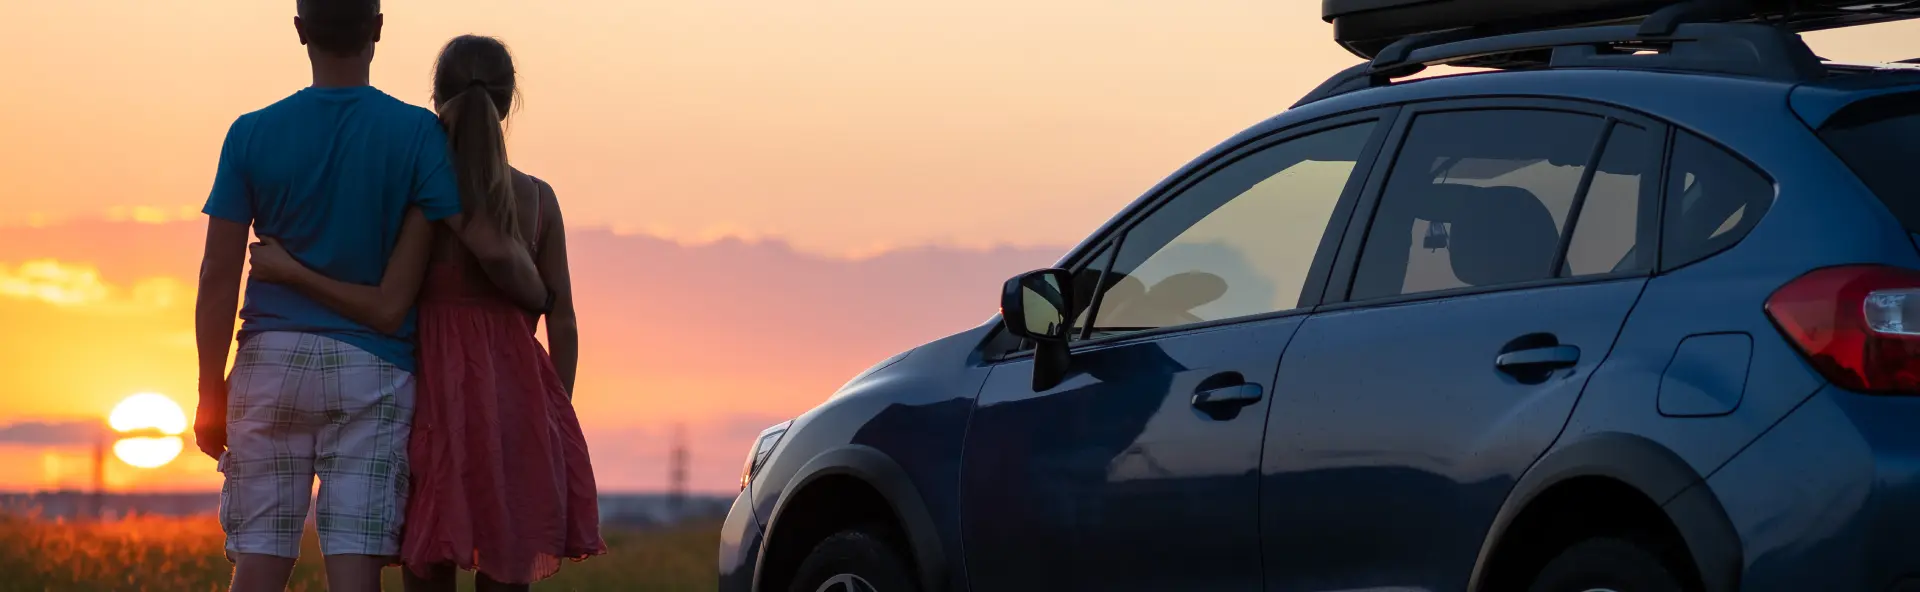 Couple admiring sunset next to new car